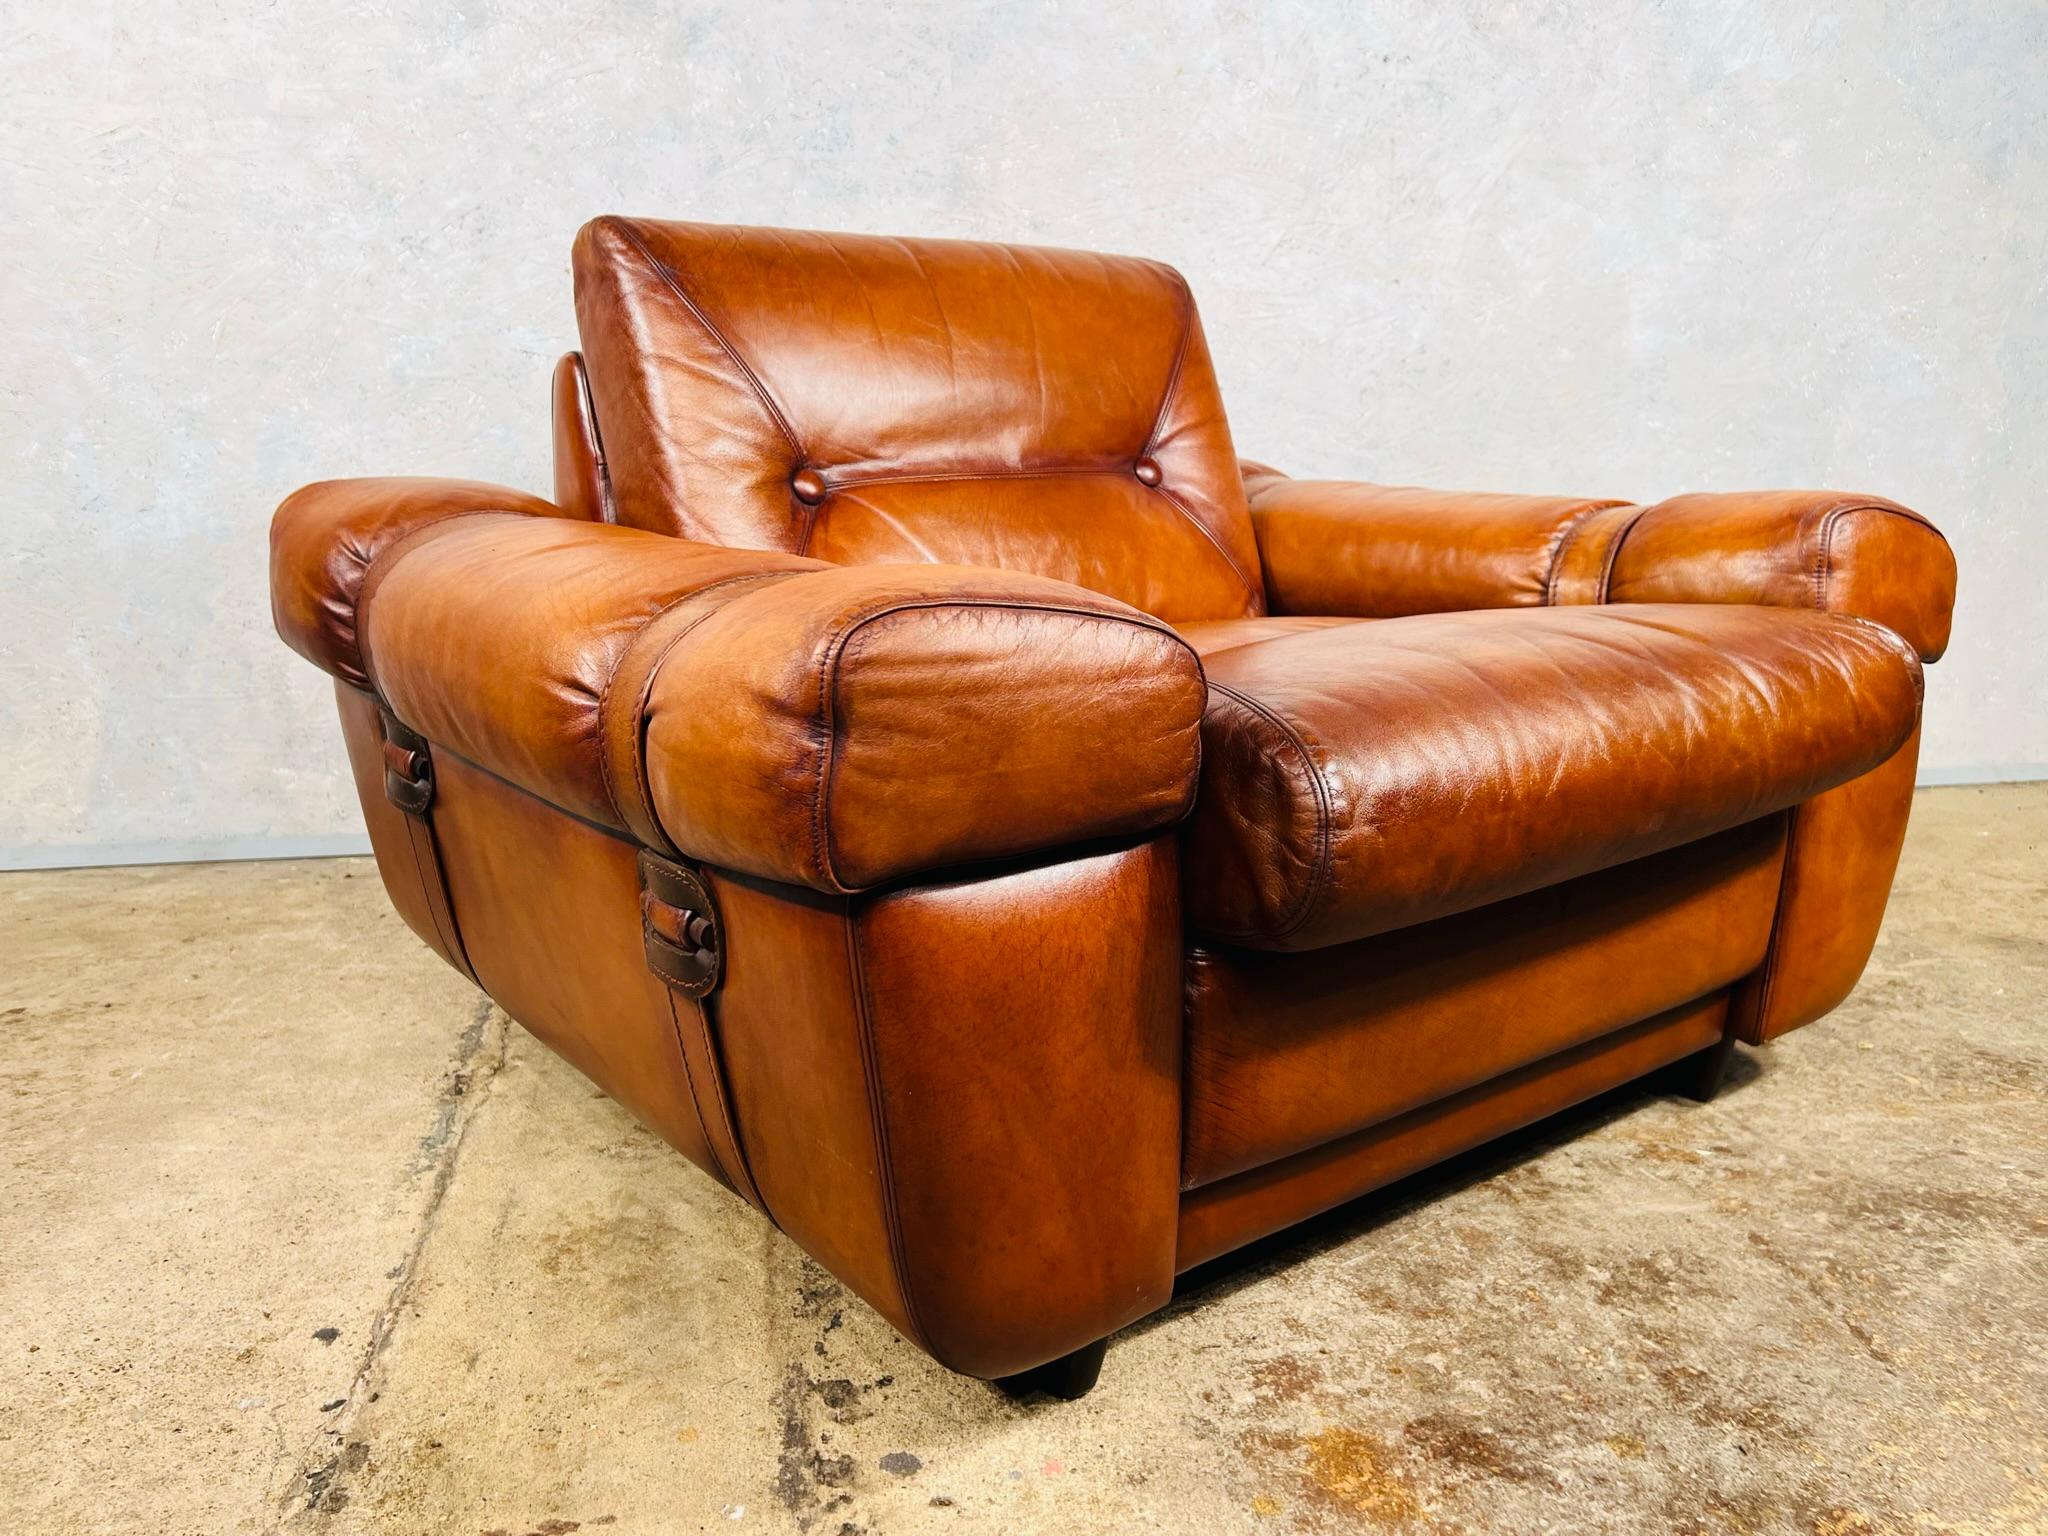 Vintage 1970s Svend Skipper Leather Light Tan Armchair with Buckles #658 For Sale 7